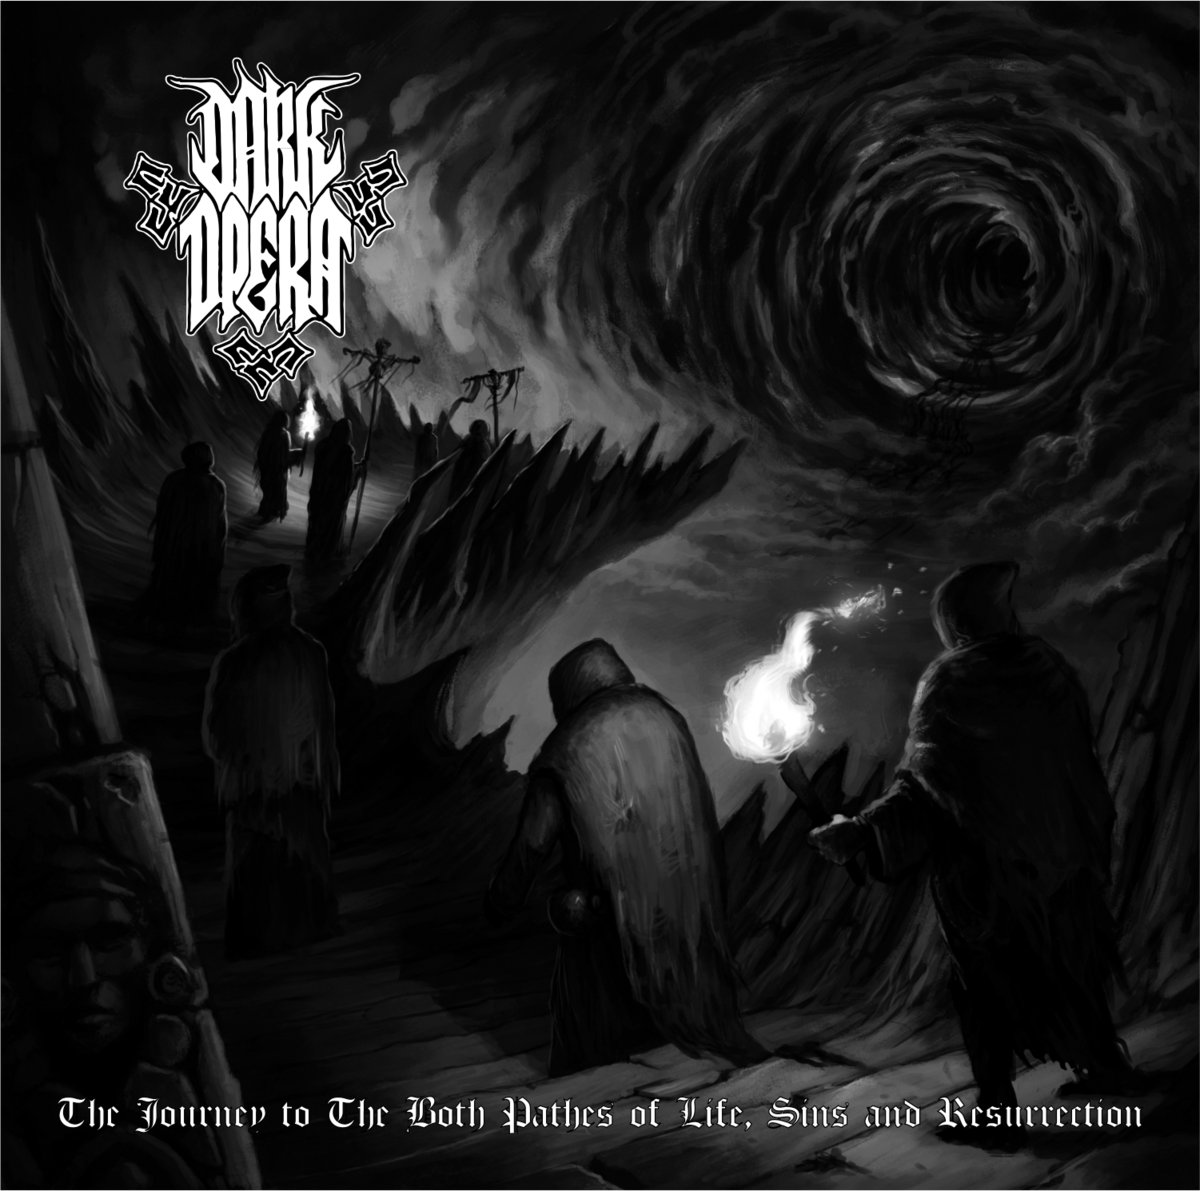 DARK OPERA - The Journey To The Both Paths of Life, Sins And Resurection